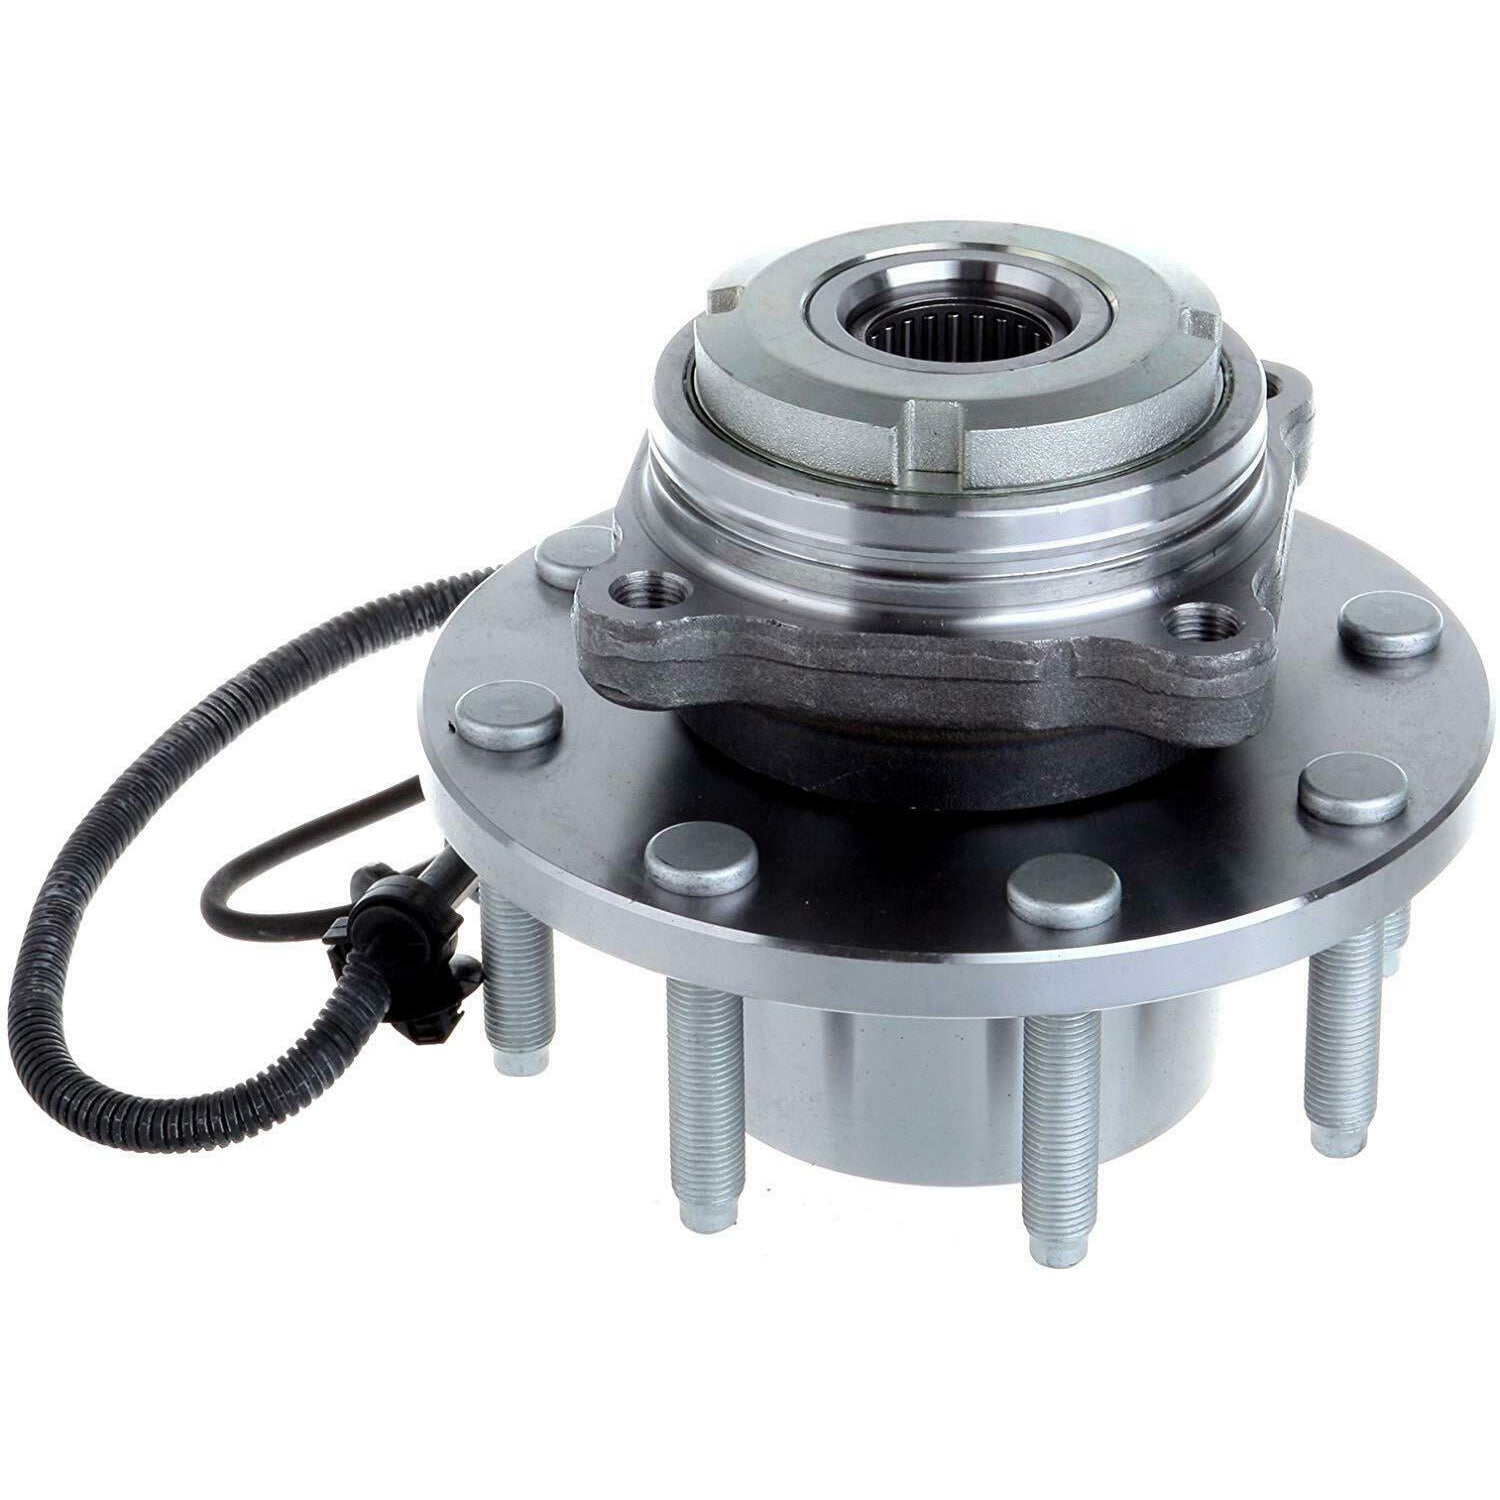 JADODE Front Wheel Bearing Hub For 2003 2004 Ford F-250 F-350 SRW FINE Thread ABS 4WD